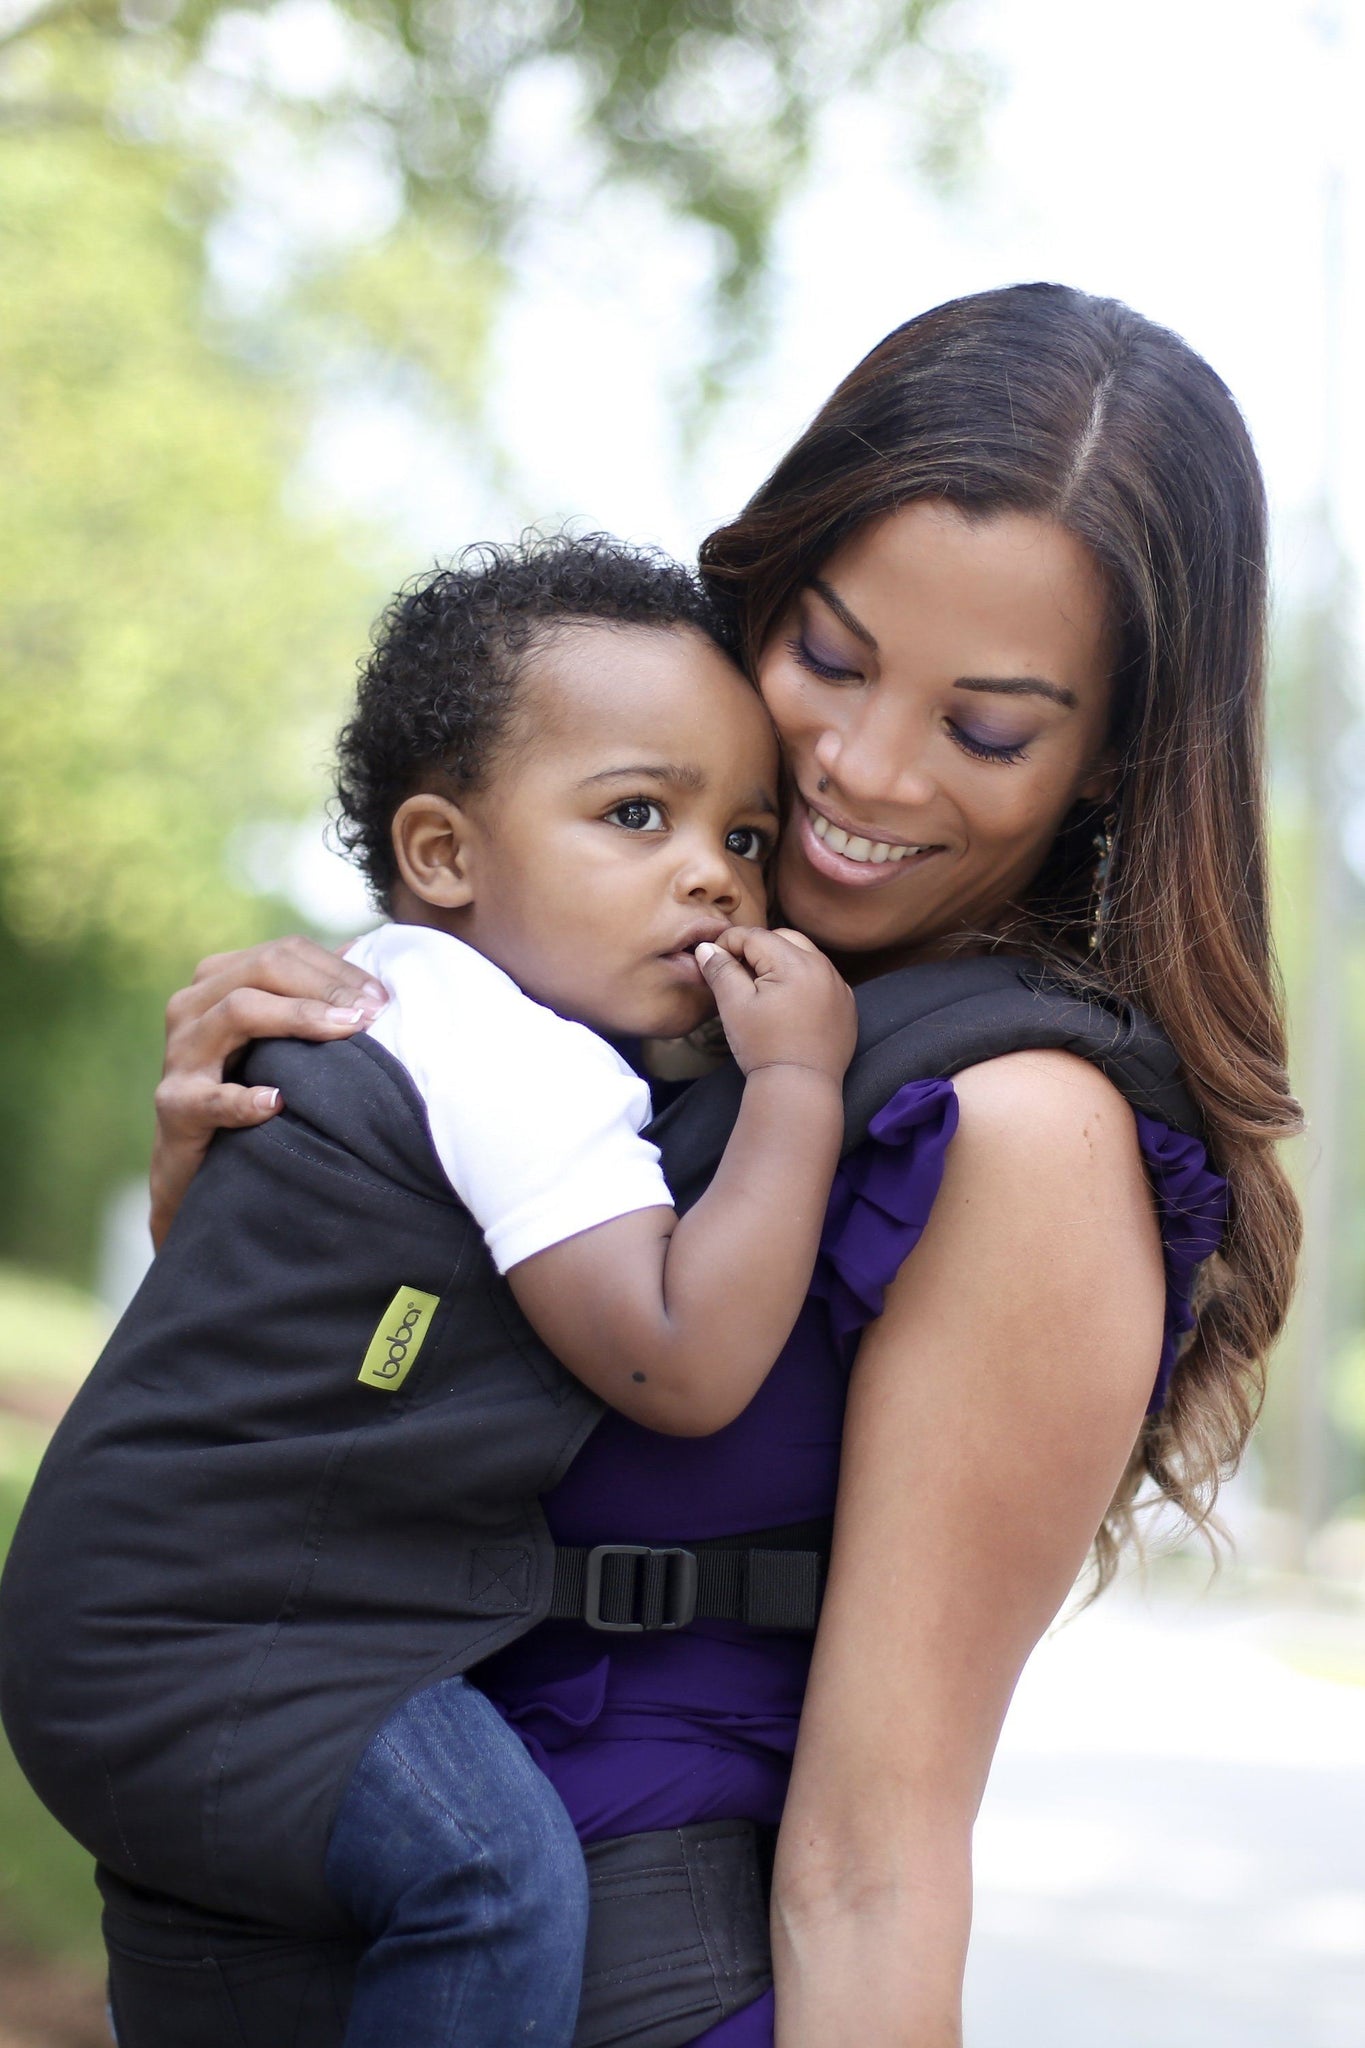 Boba classic baby carrier Organic Slate. Our streamlined soft structured baby carrier is designed to go and grow with your little one. This ergonomic front facing baby carrier is ready to use from infant to toddler.